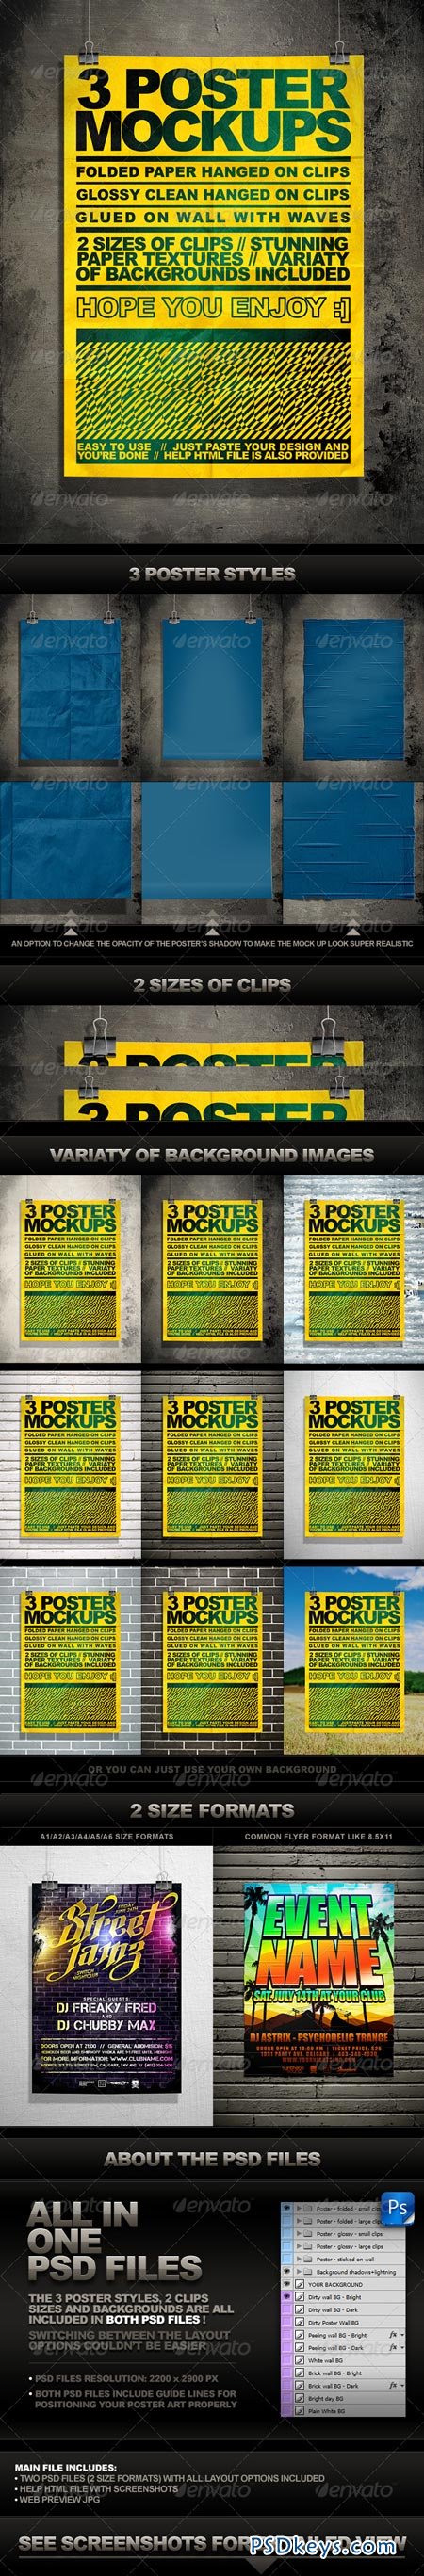 Download Poster Mock Up Kit = 3 Unique Styles + Backgrounds 246026 ... PSD Mockup Templates